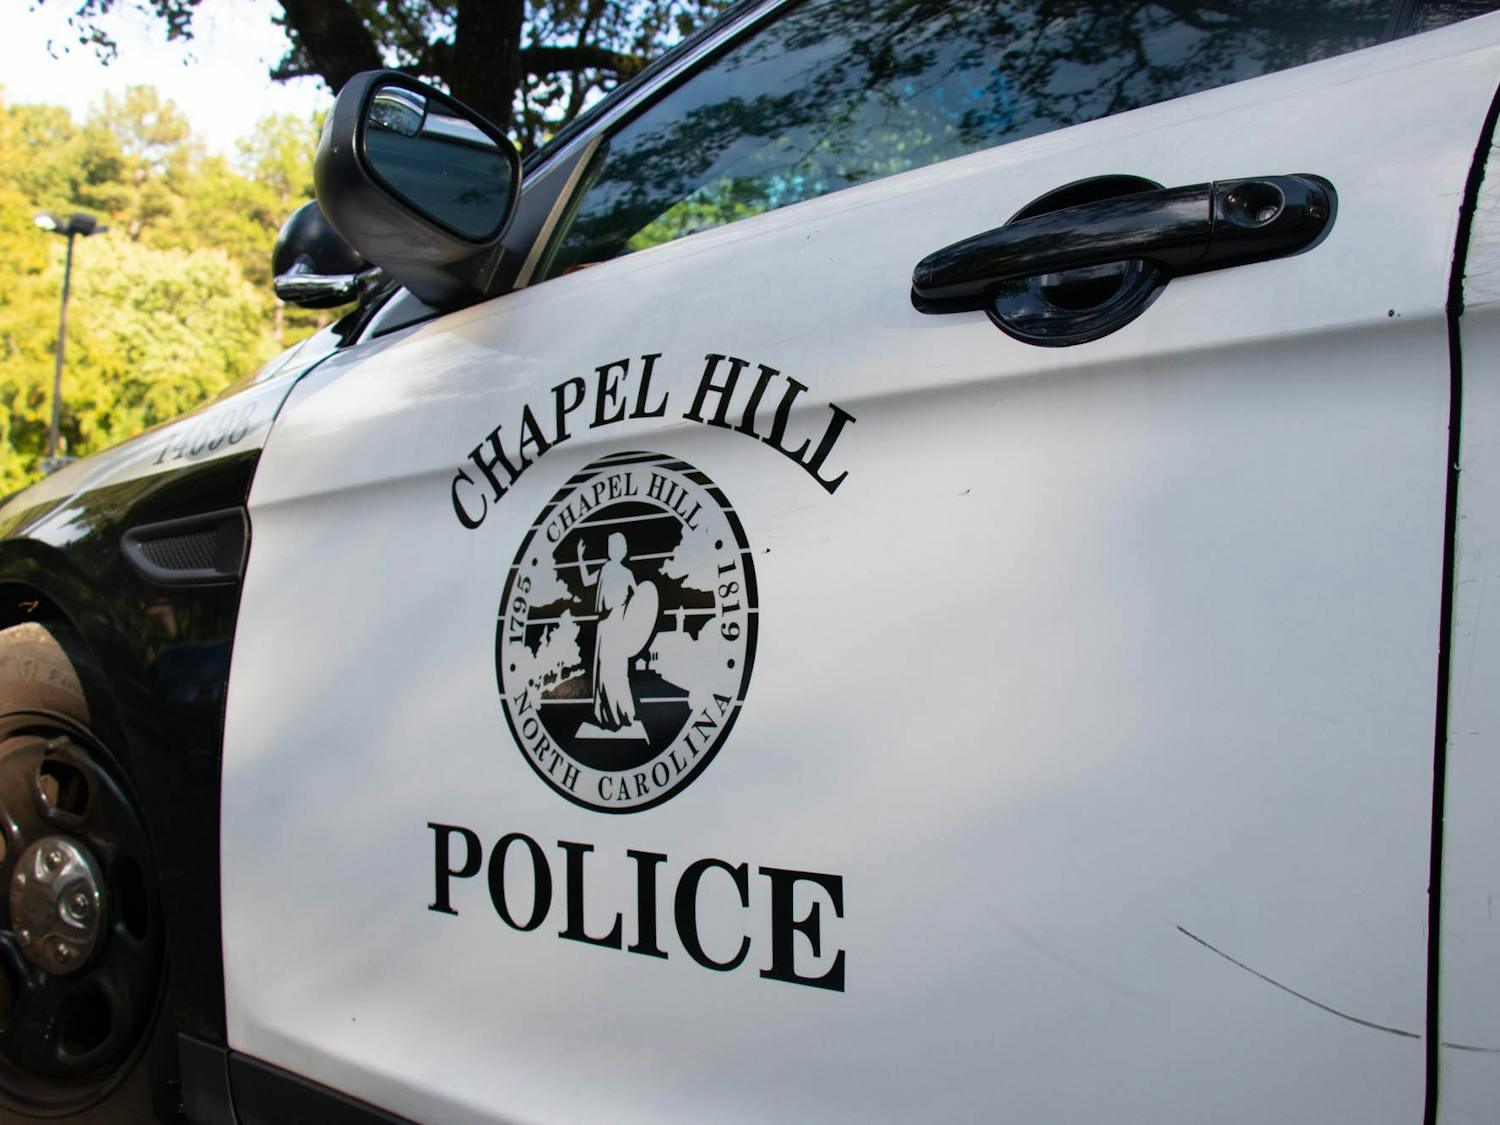 A Chapel Hill police car is pictured on Oct. 7, 2022.